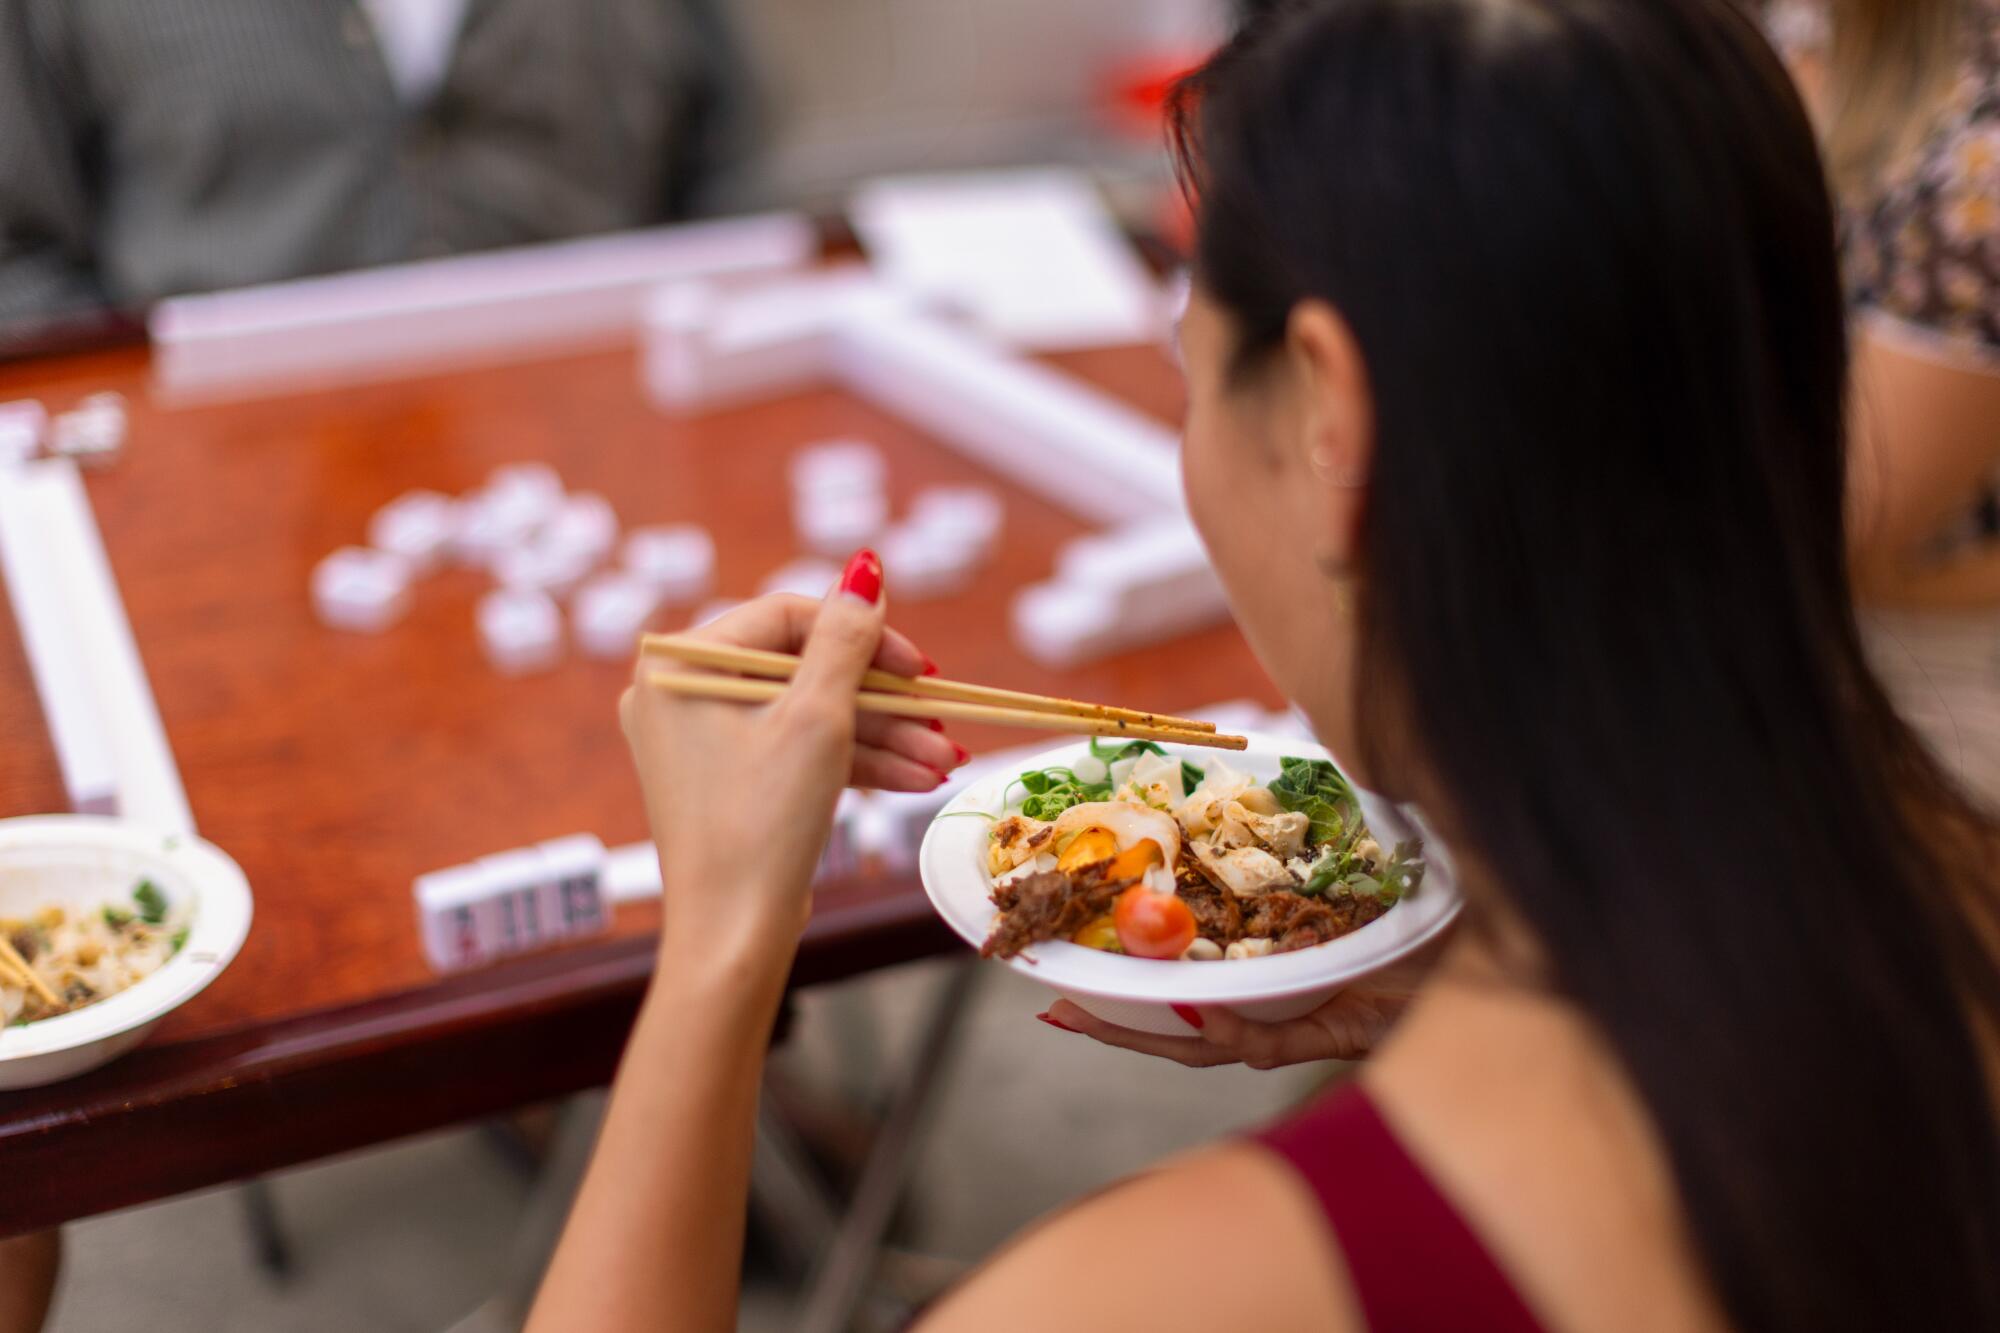 A woman eats food with chopsticks while sitting at a mah-jongg table.